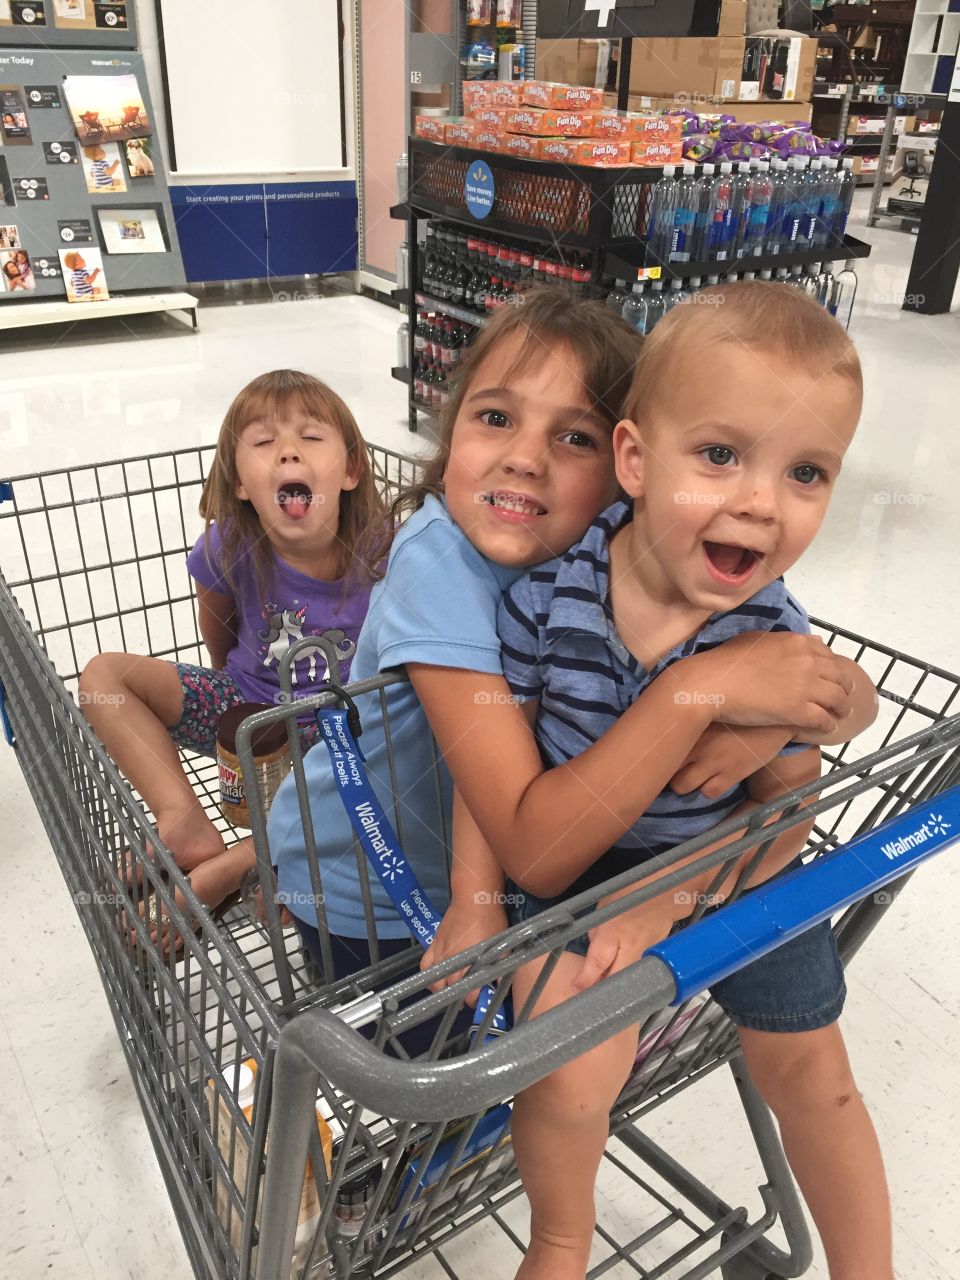 Typical shopping with kids 😜